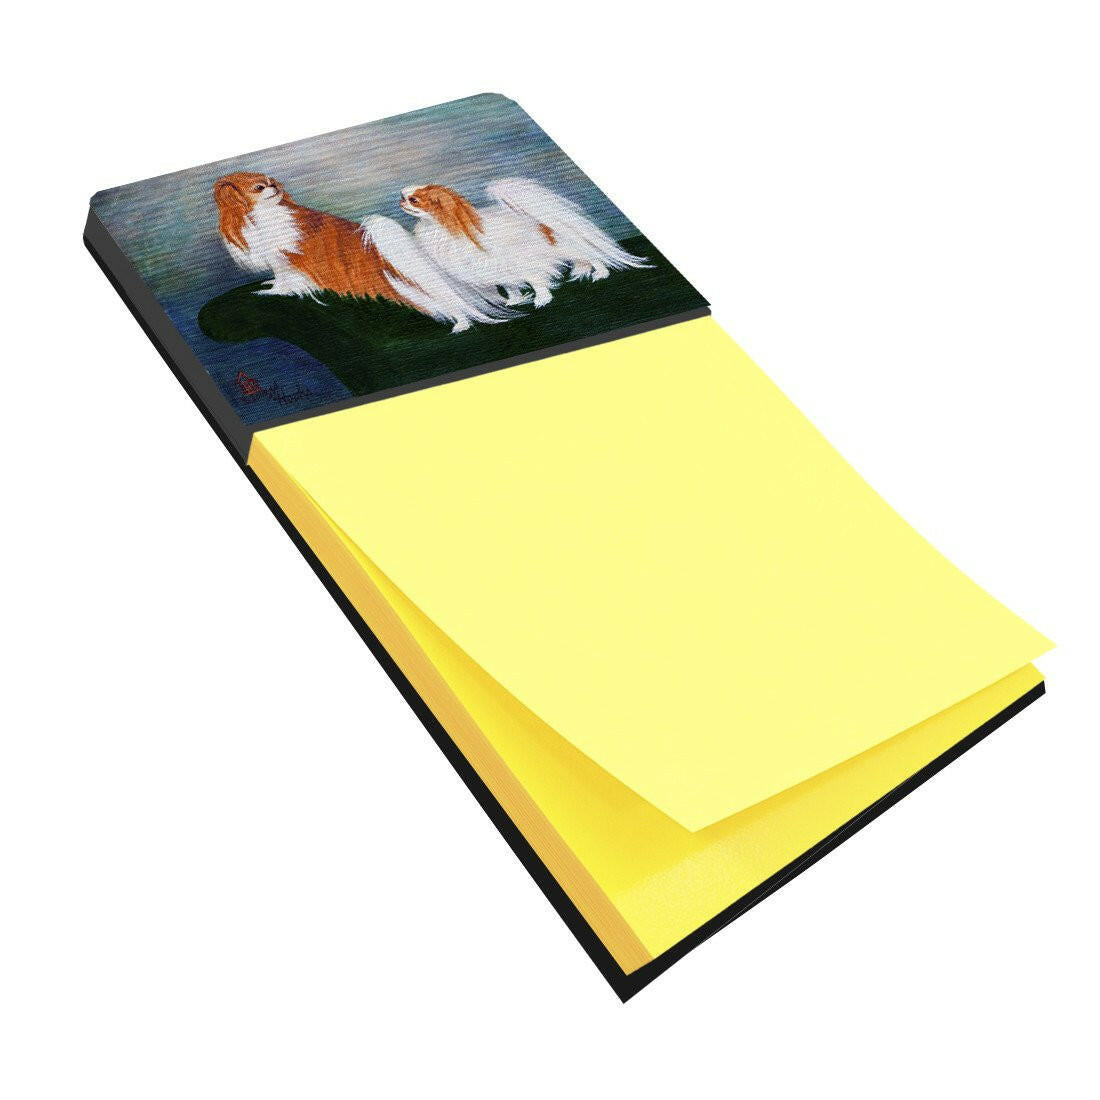 Japanese Chin Standing on my tail Sticky Note Holder MH1059SN by Caroline's Treasures